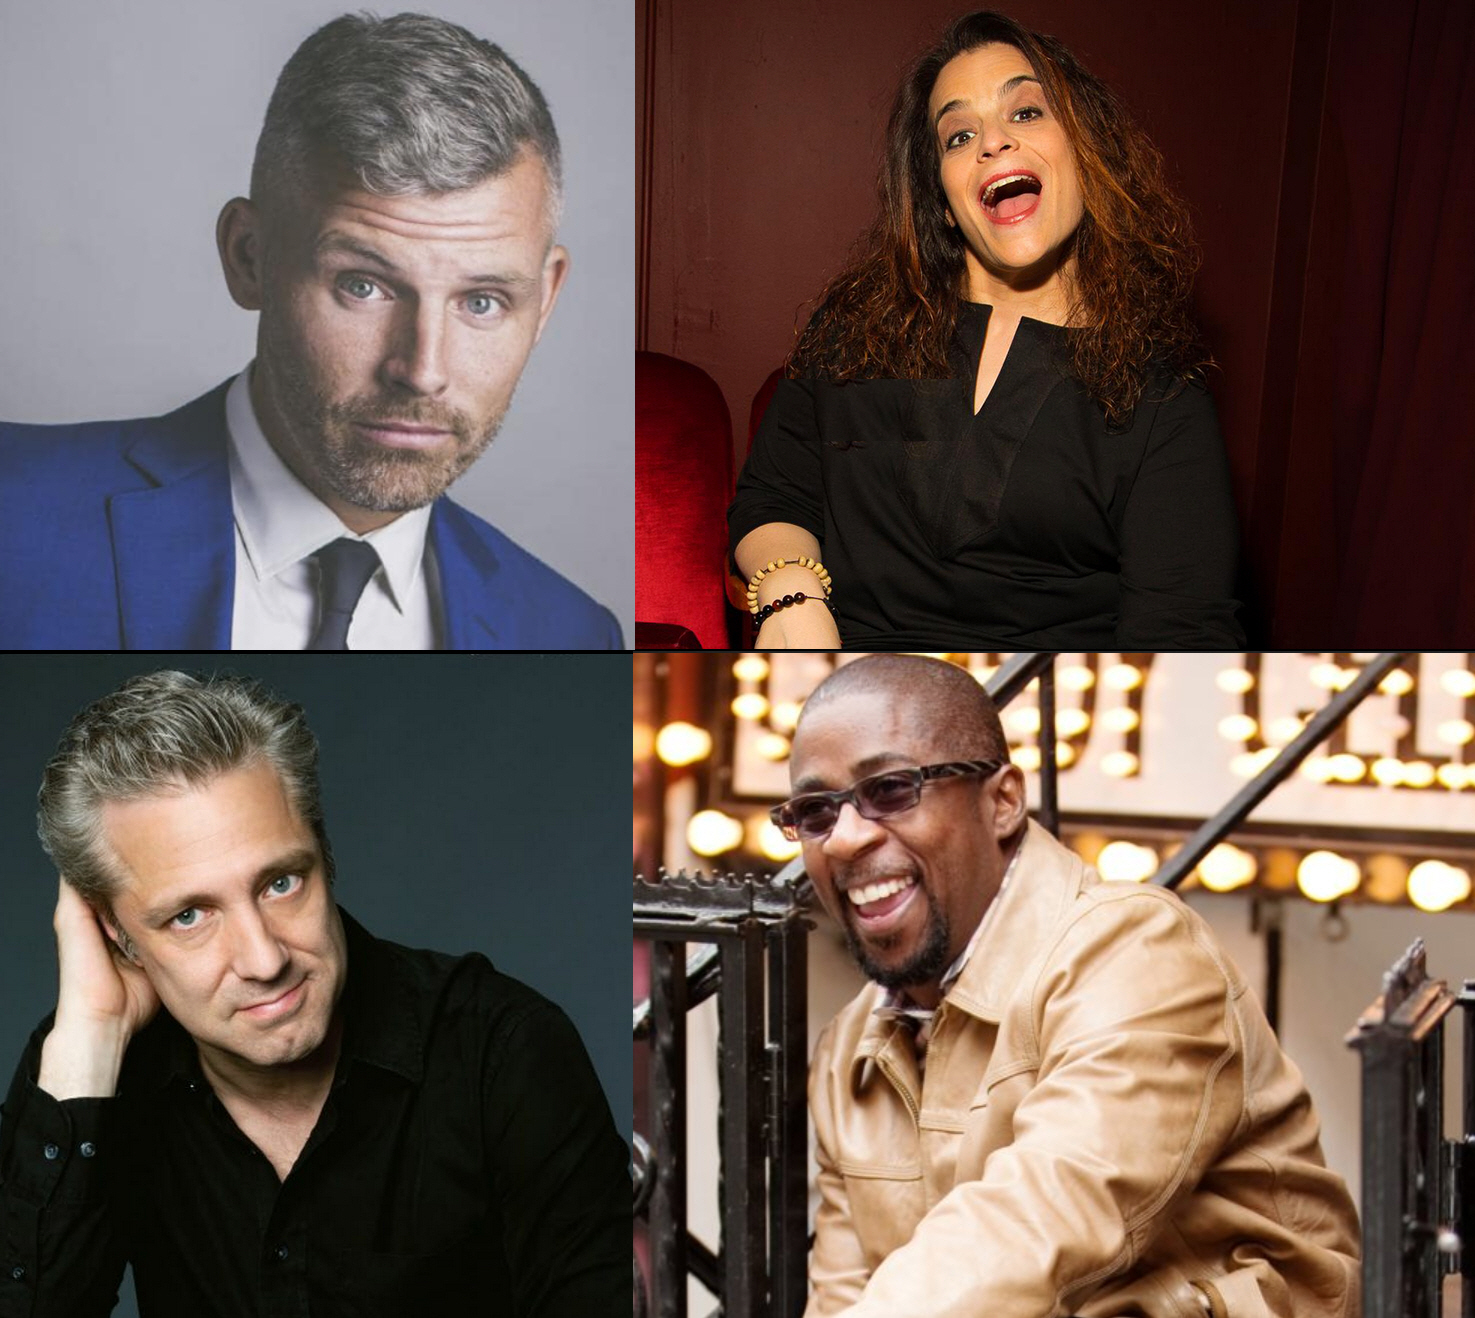 Des Bishop, Jessica Kirson, Nick Griffin, and Keith Robinson: "Christmas Eve at Comedy Cellar"